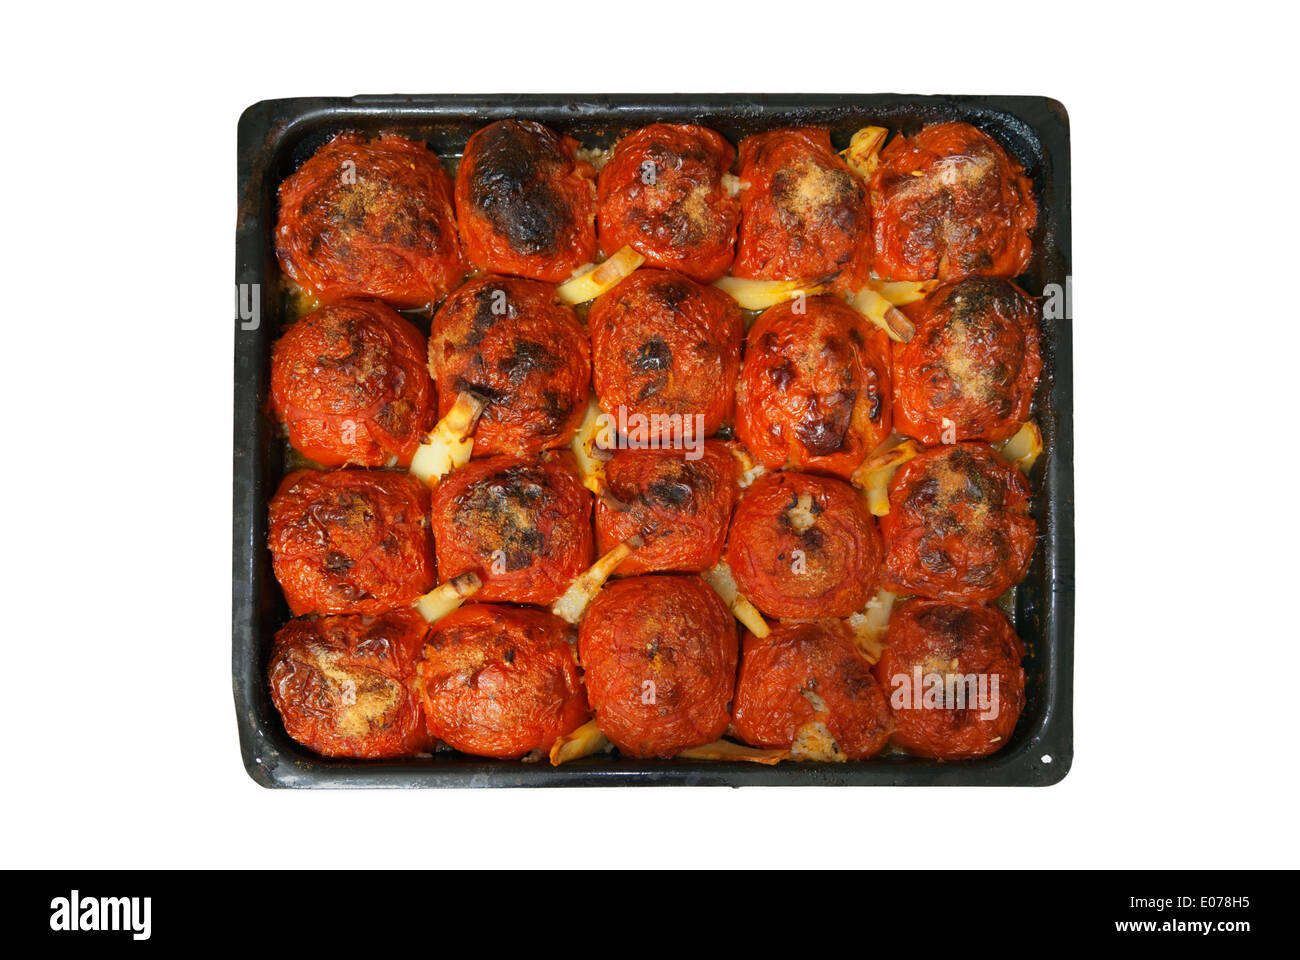 Pan full of stuffed tomatoes baked ready for serving Stock Photo